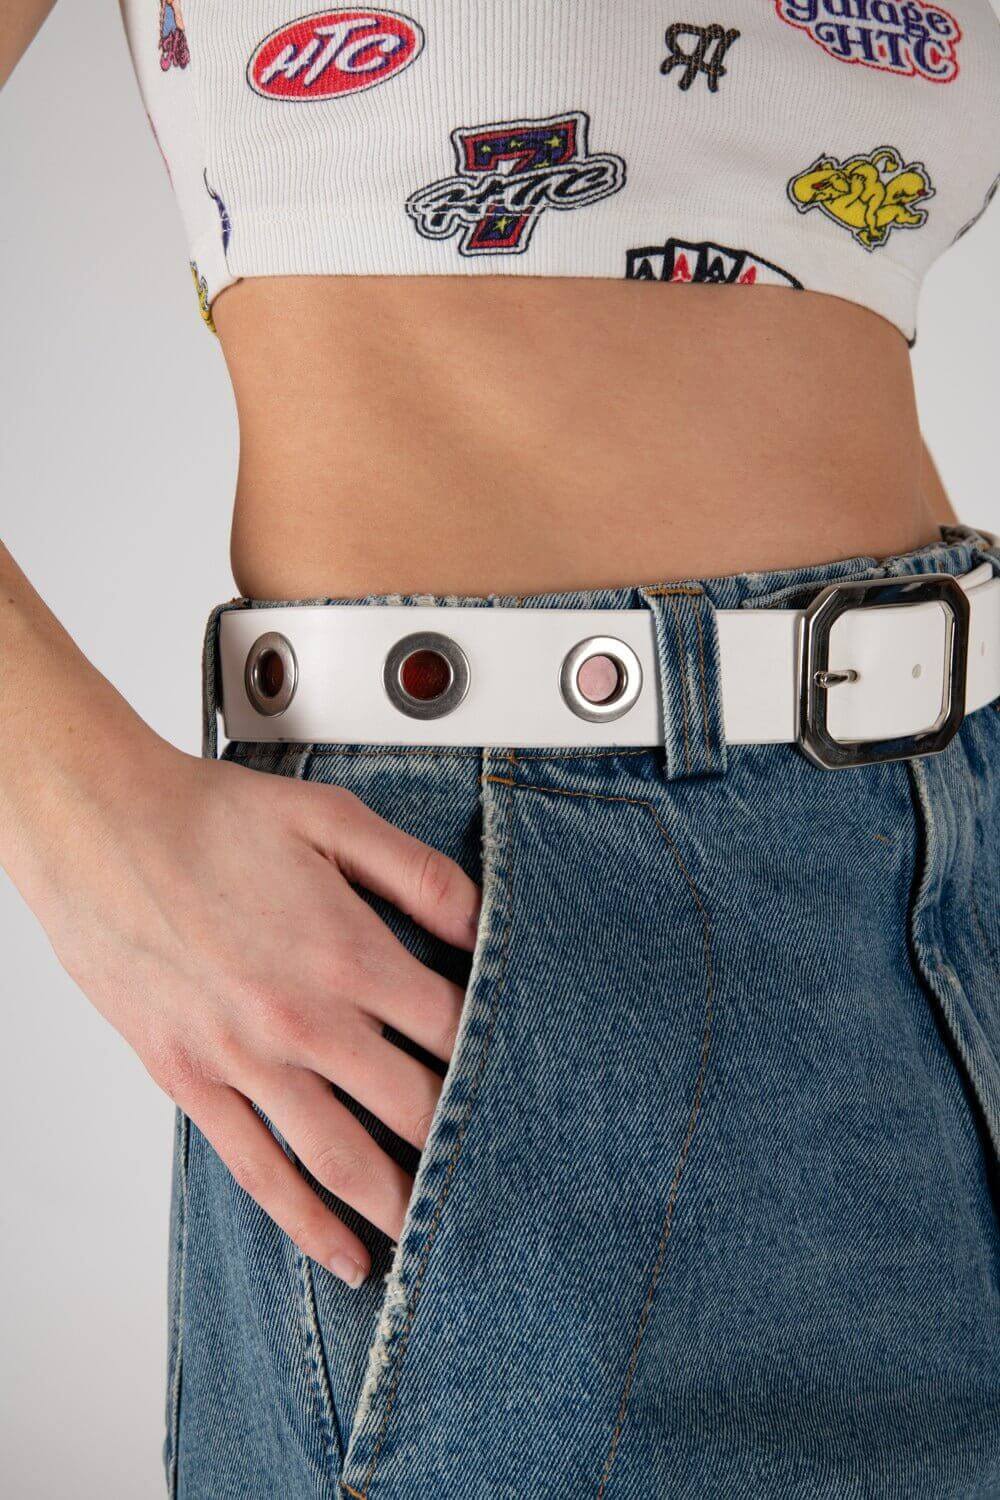 EYELET BELT White leather belt with red eyelets. Squared buckle. Height: 4 cm. Made in Italy. HTC LOS ANGELES